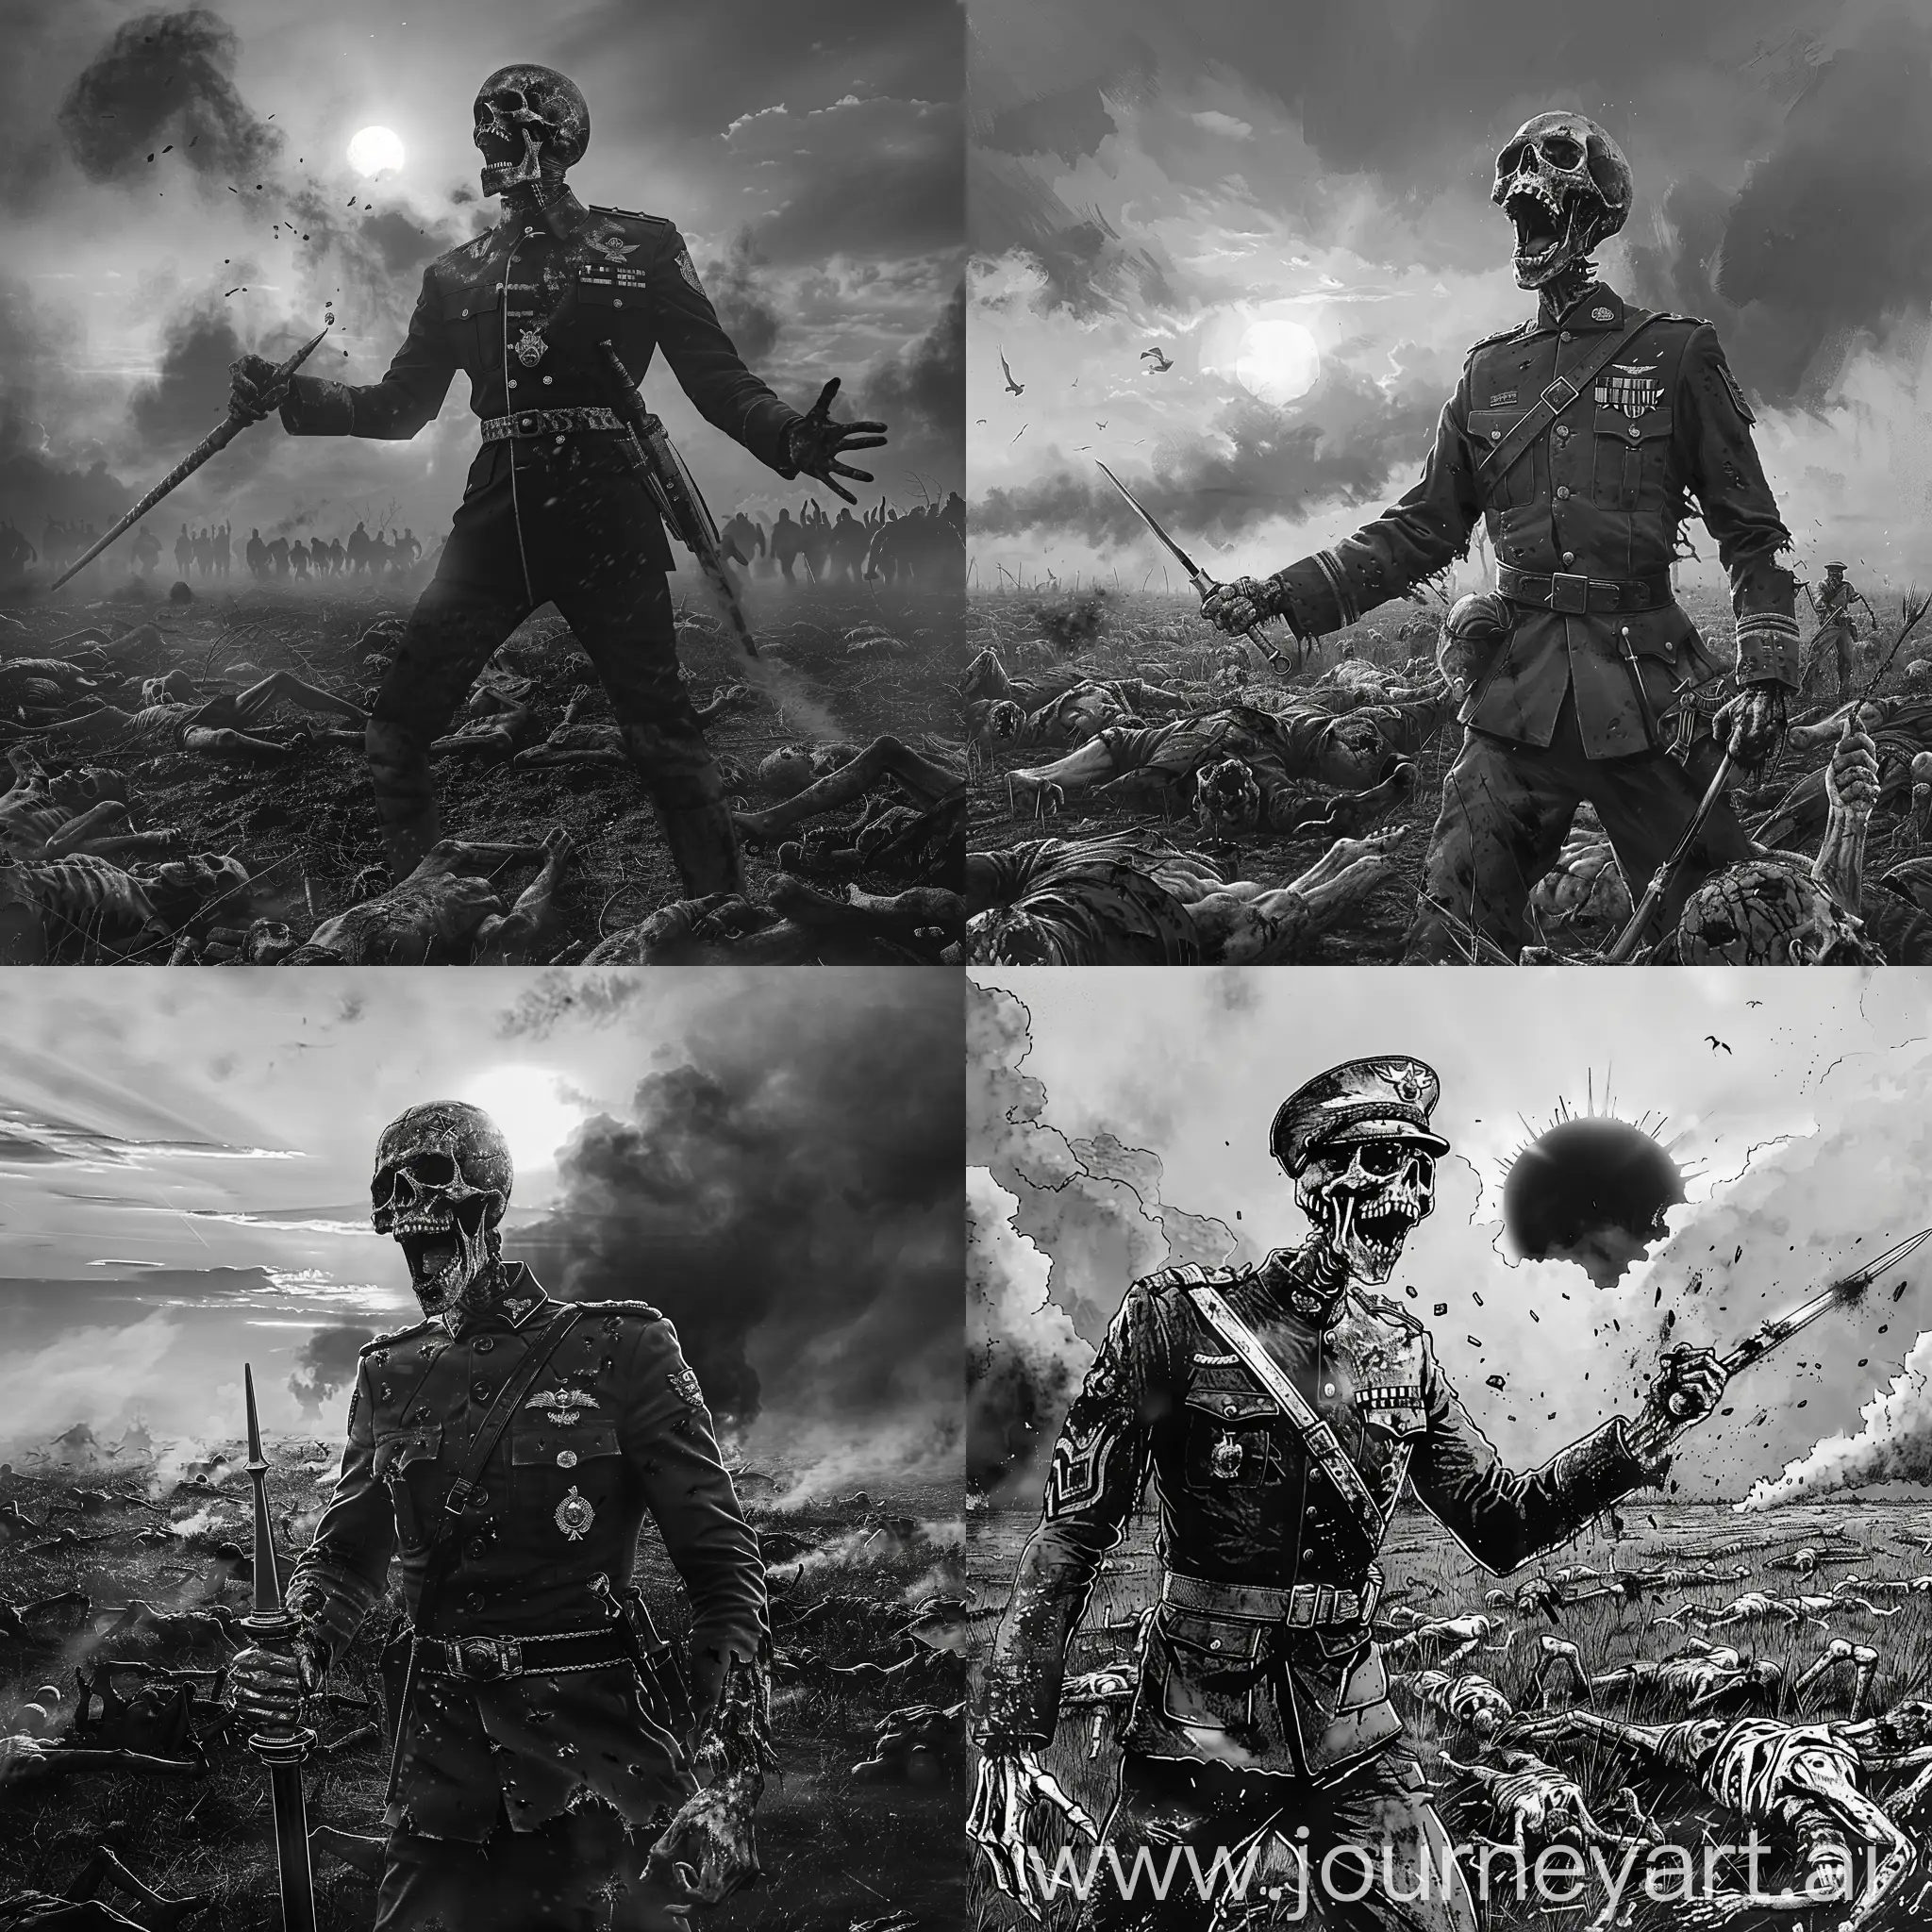 undead with officer's saber in hand, screaming skull, officer uniform, army, black sun, burned field, field full of dead bodies, smoke, smog, madness, monochrome